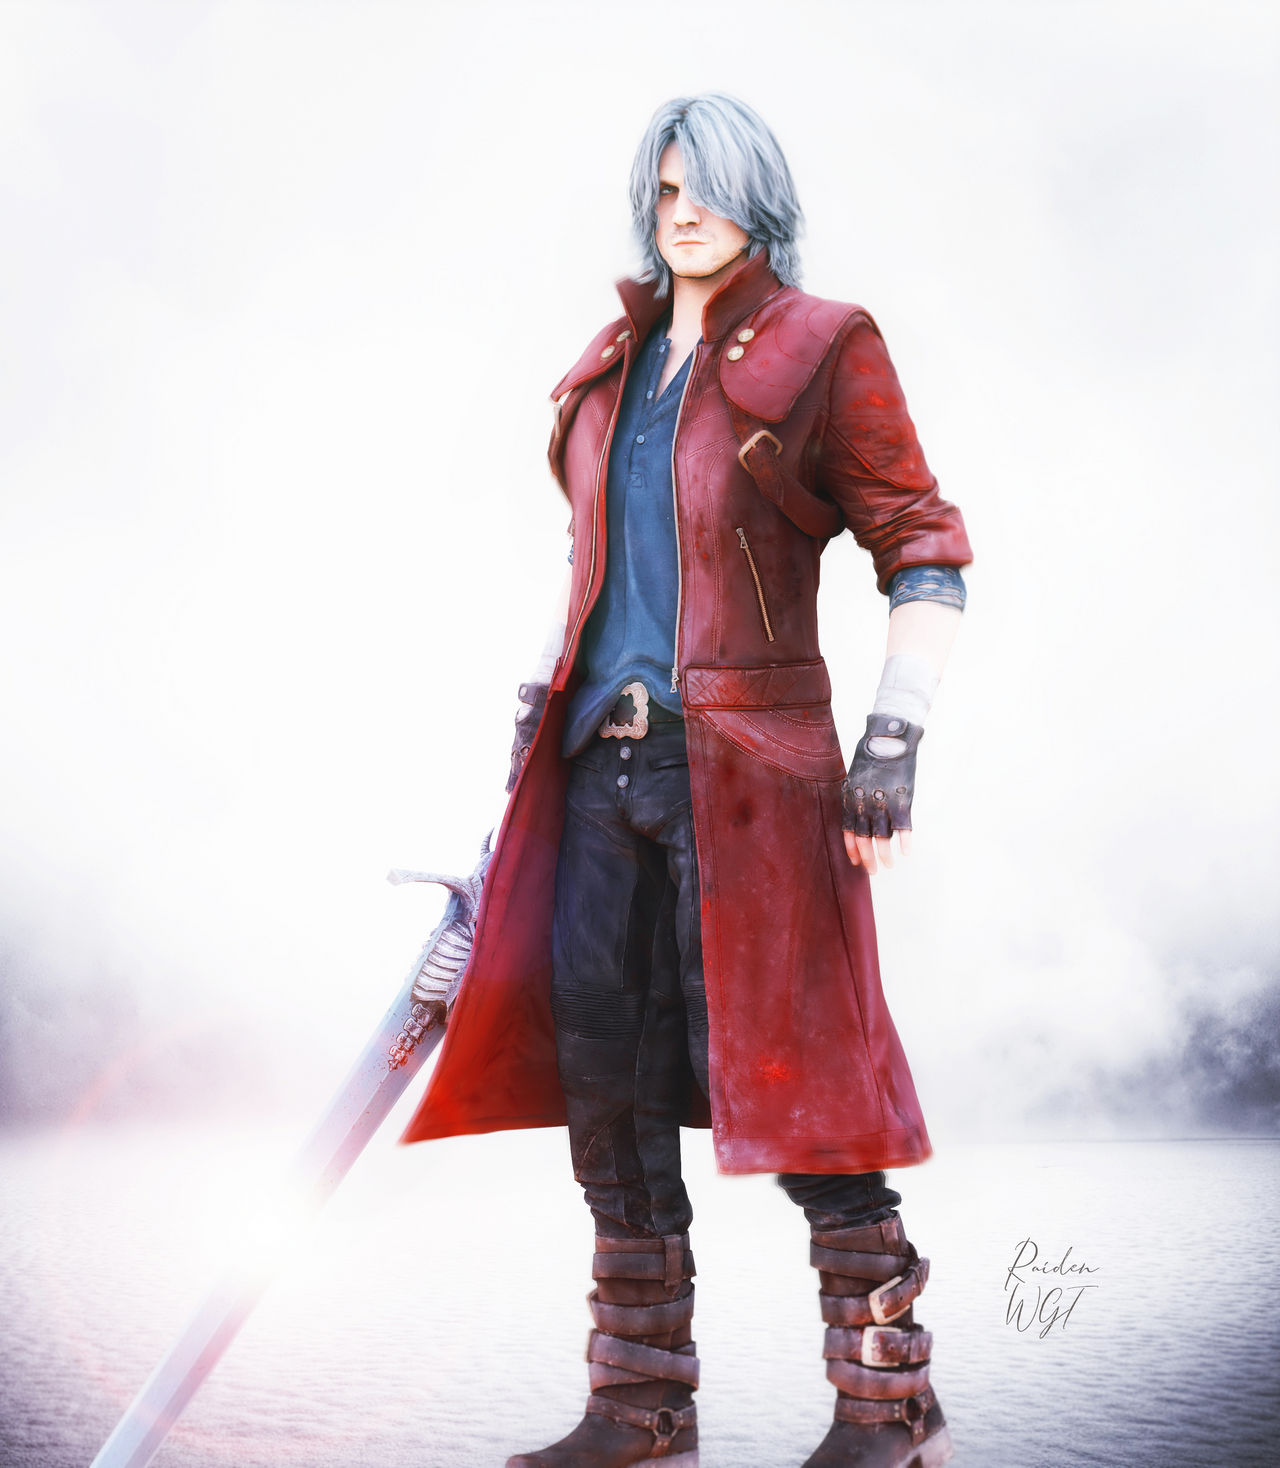 Game Theory: Dante's Age PROVEN (link down below) by The4thSnake